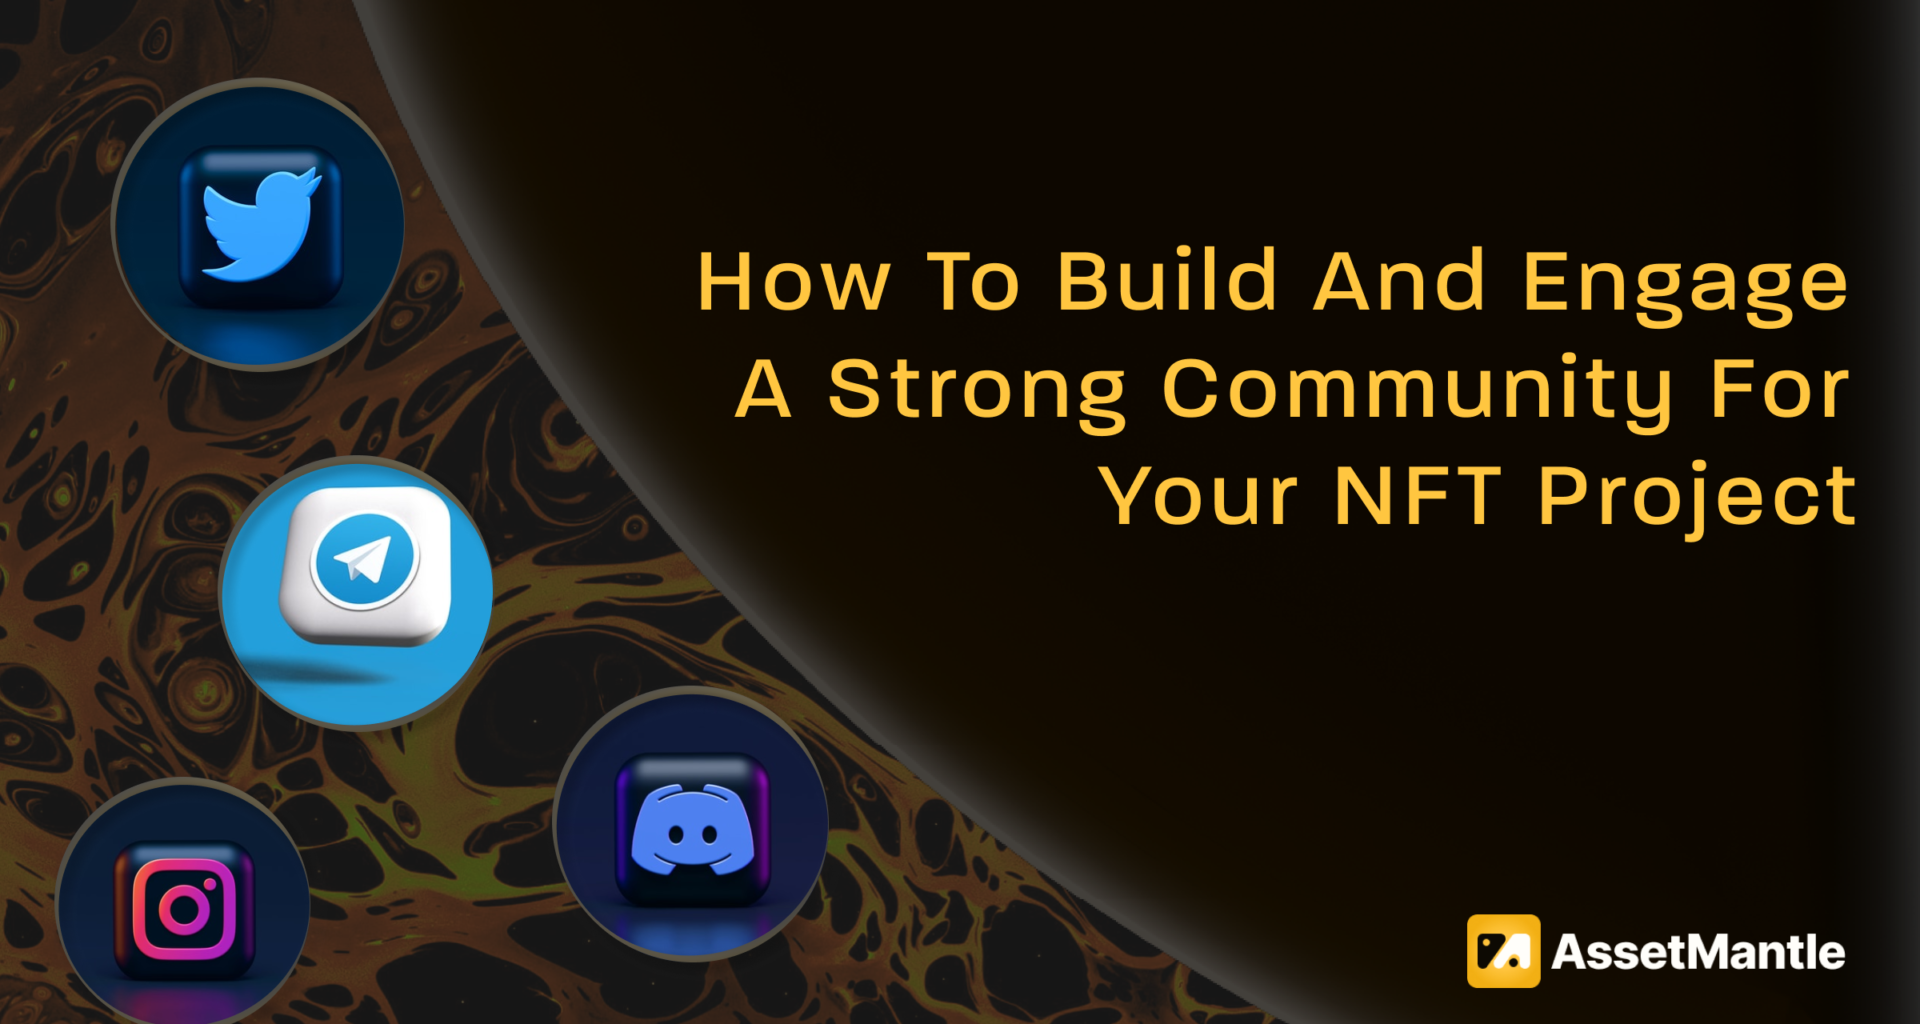 How to Build and Engage a Strong Community for Your NFT Project